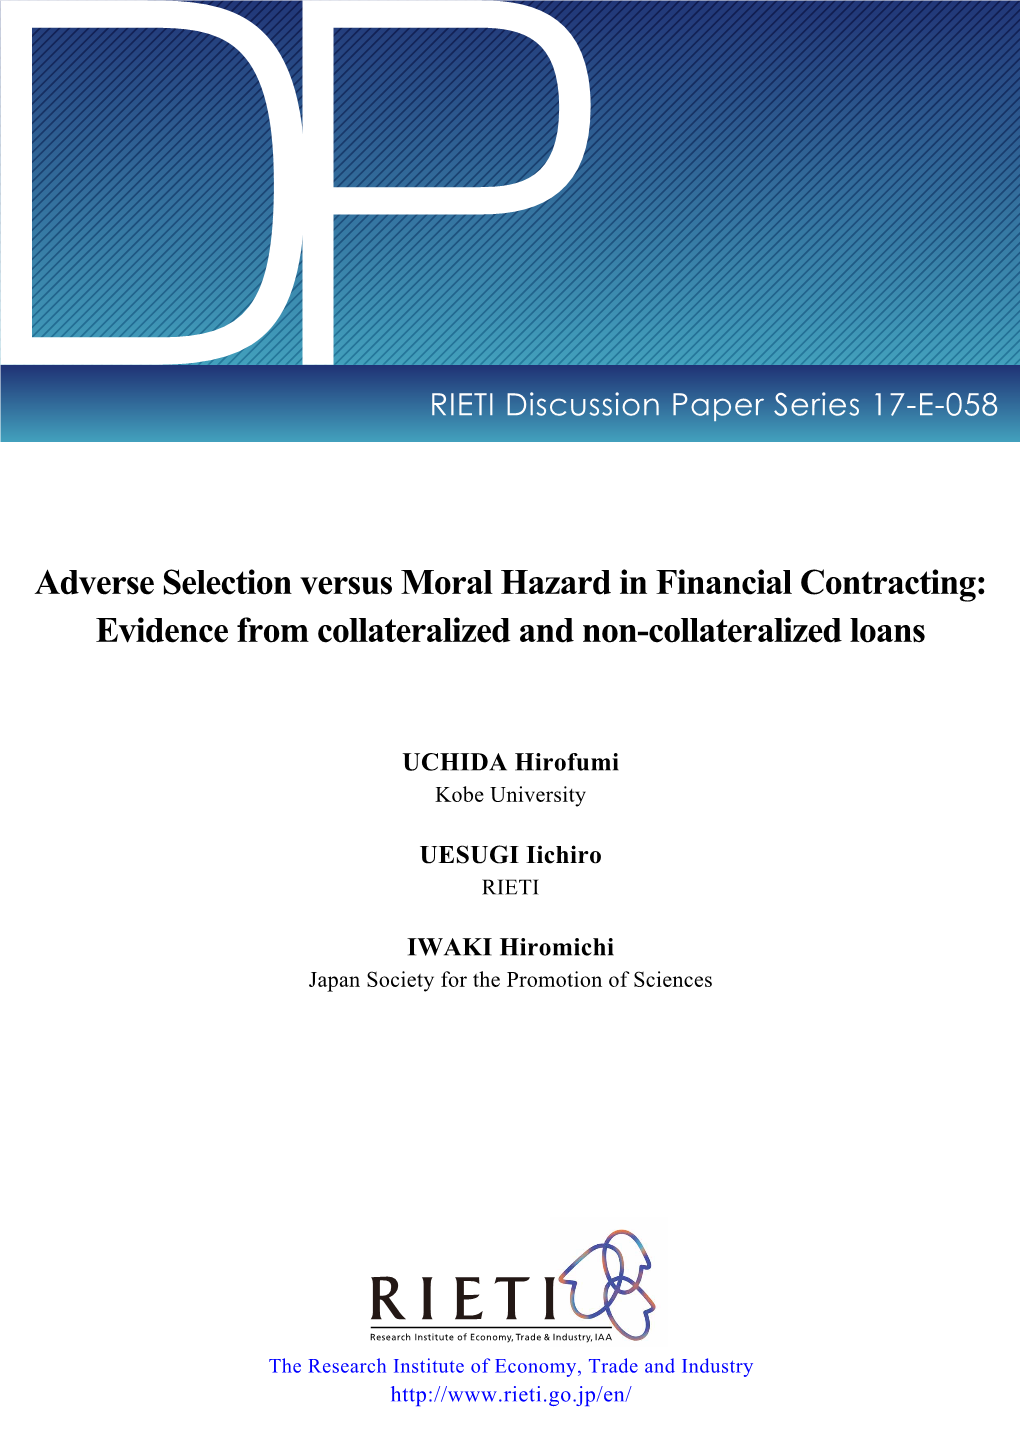 Adverse Selection Versus Moral Hazard in Financial Contracting: Evidence from Collateralized and Non-Collateralized Loans